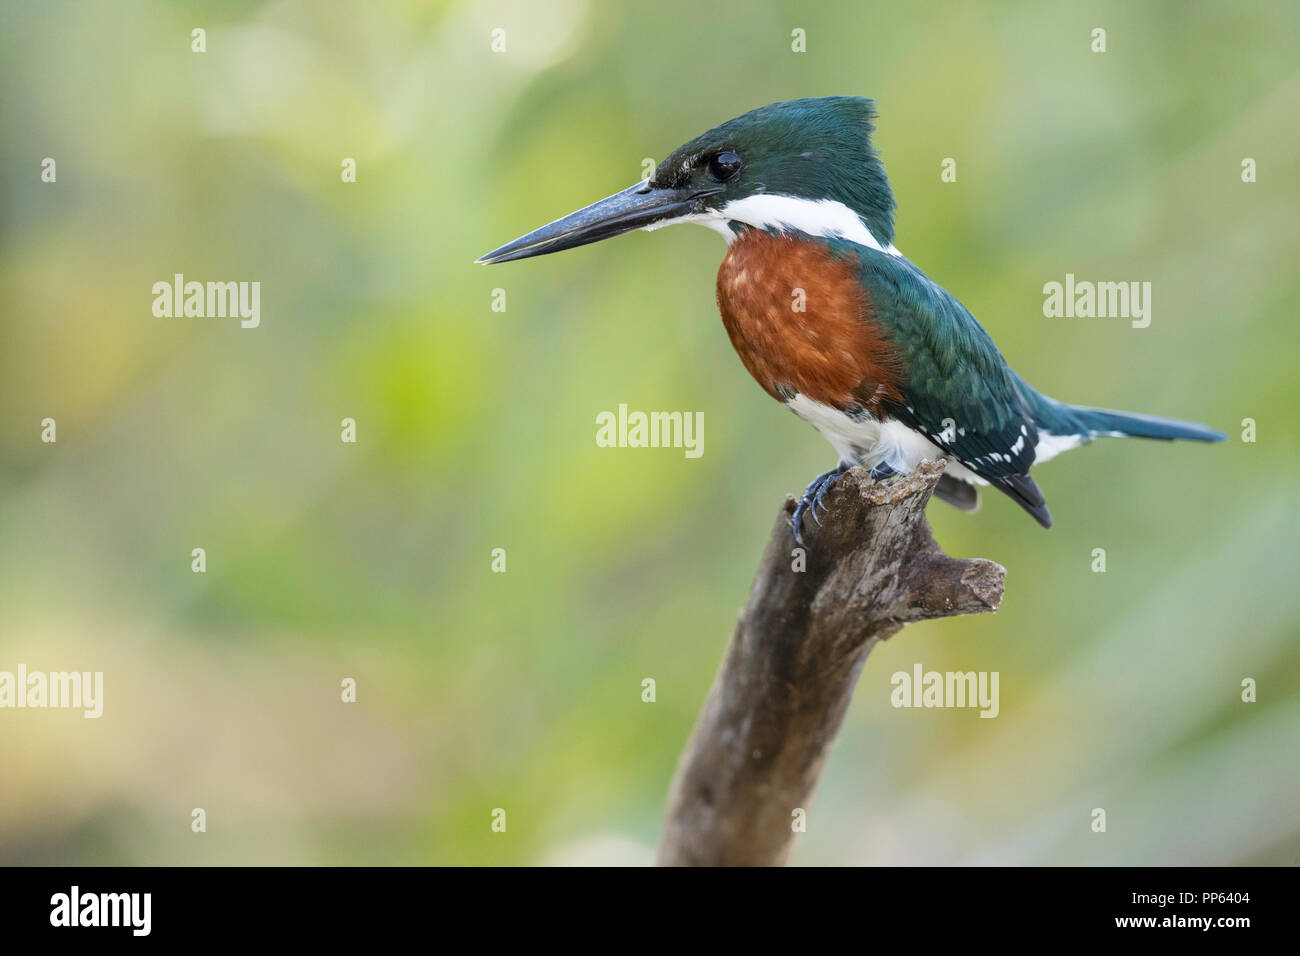 Male green kingfisher (Chloroceryle americana), soft focus background and copy space, Porto Jofre, Mato Grosso, Pantanal, Brazil. Stock Photo